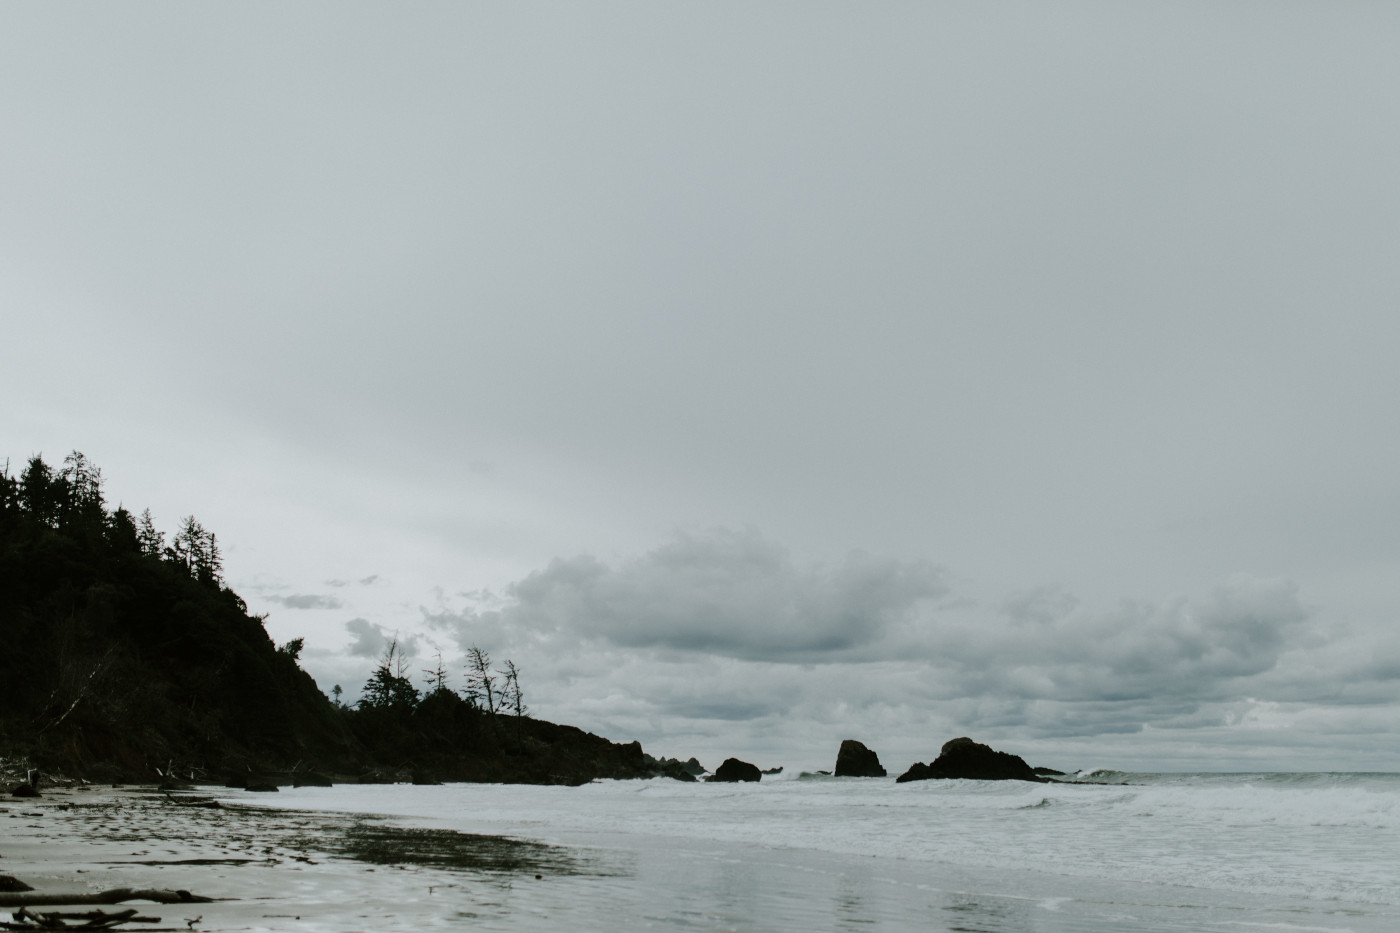 A view of the rocks at Cannon Beach. Elopement wedding photography at Cannon Beach by Sienna Plus Josh.